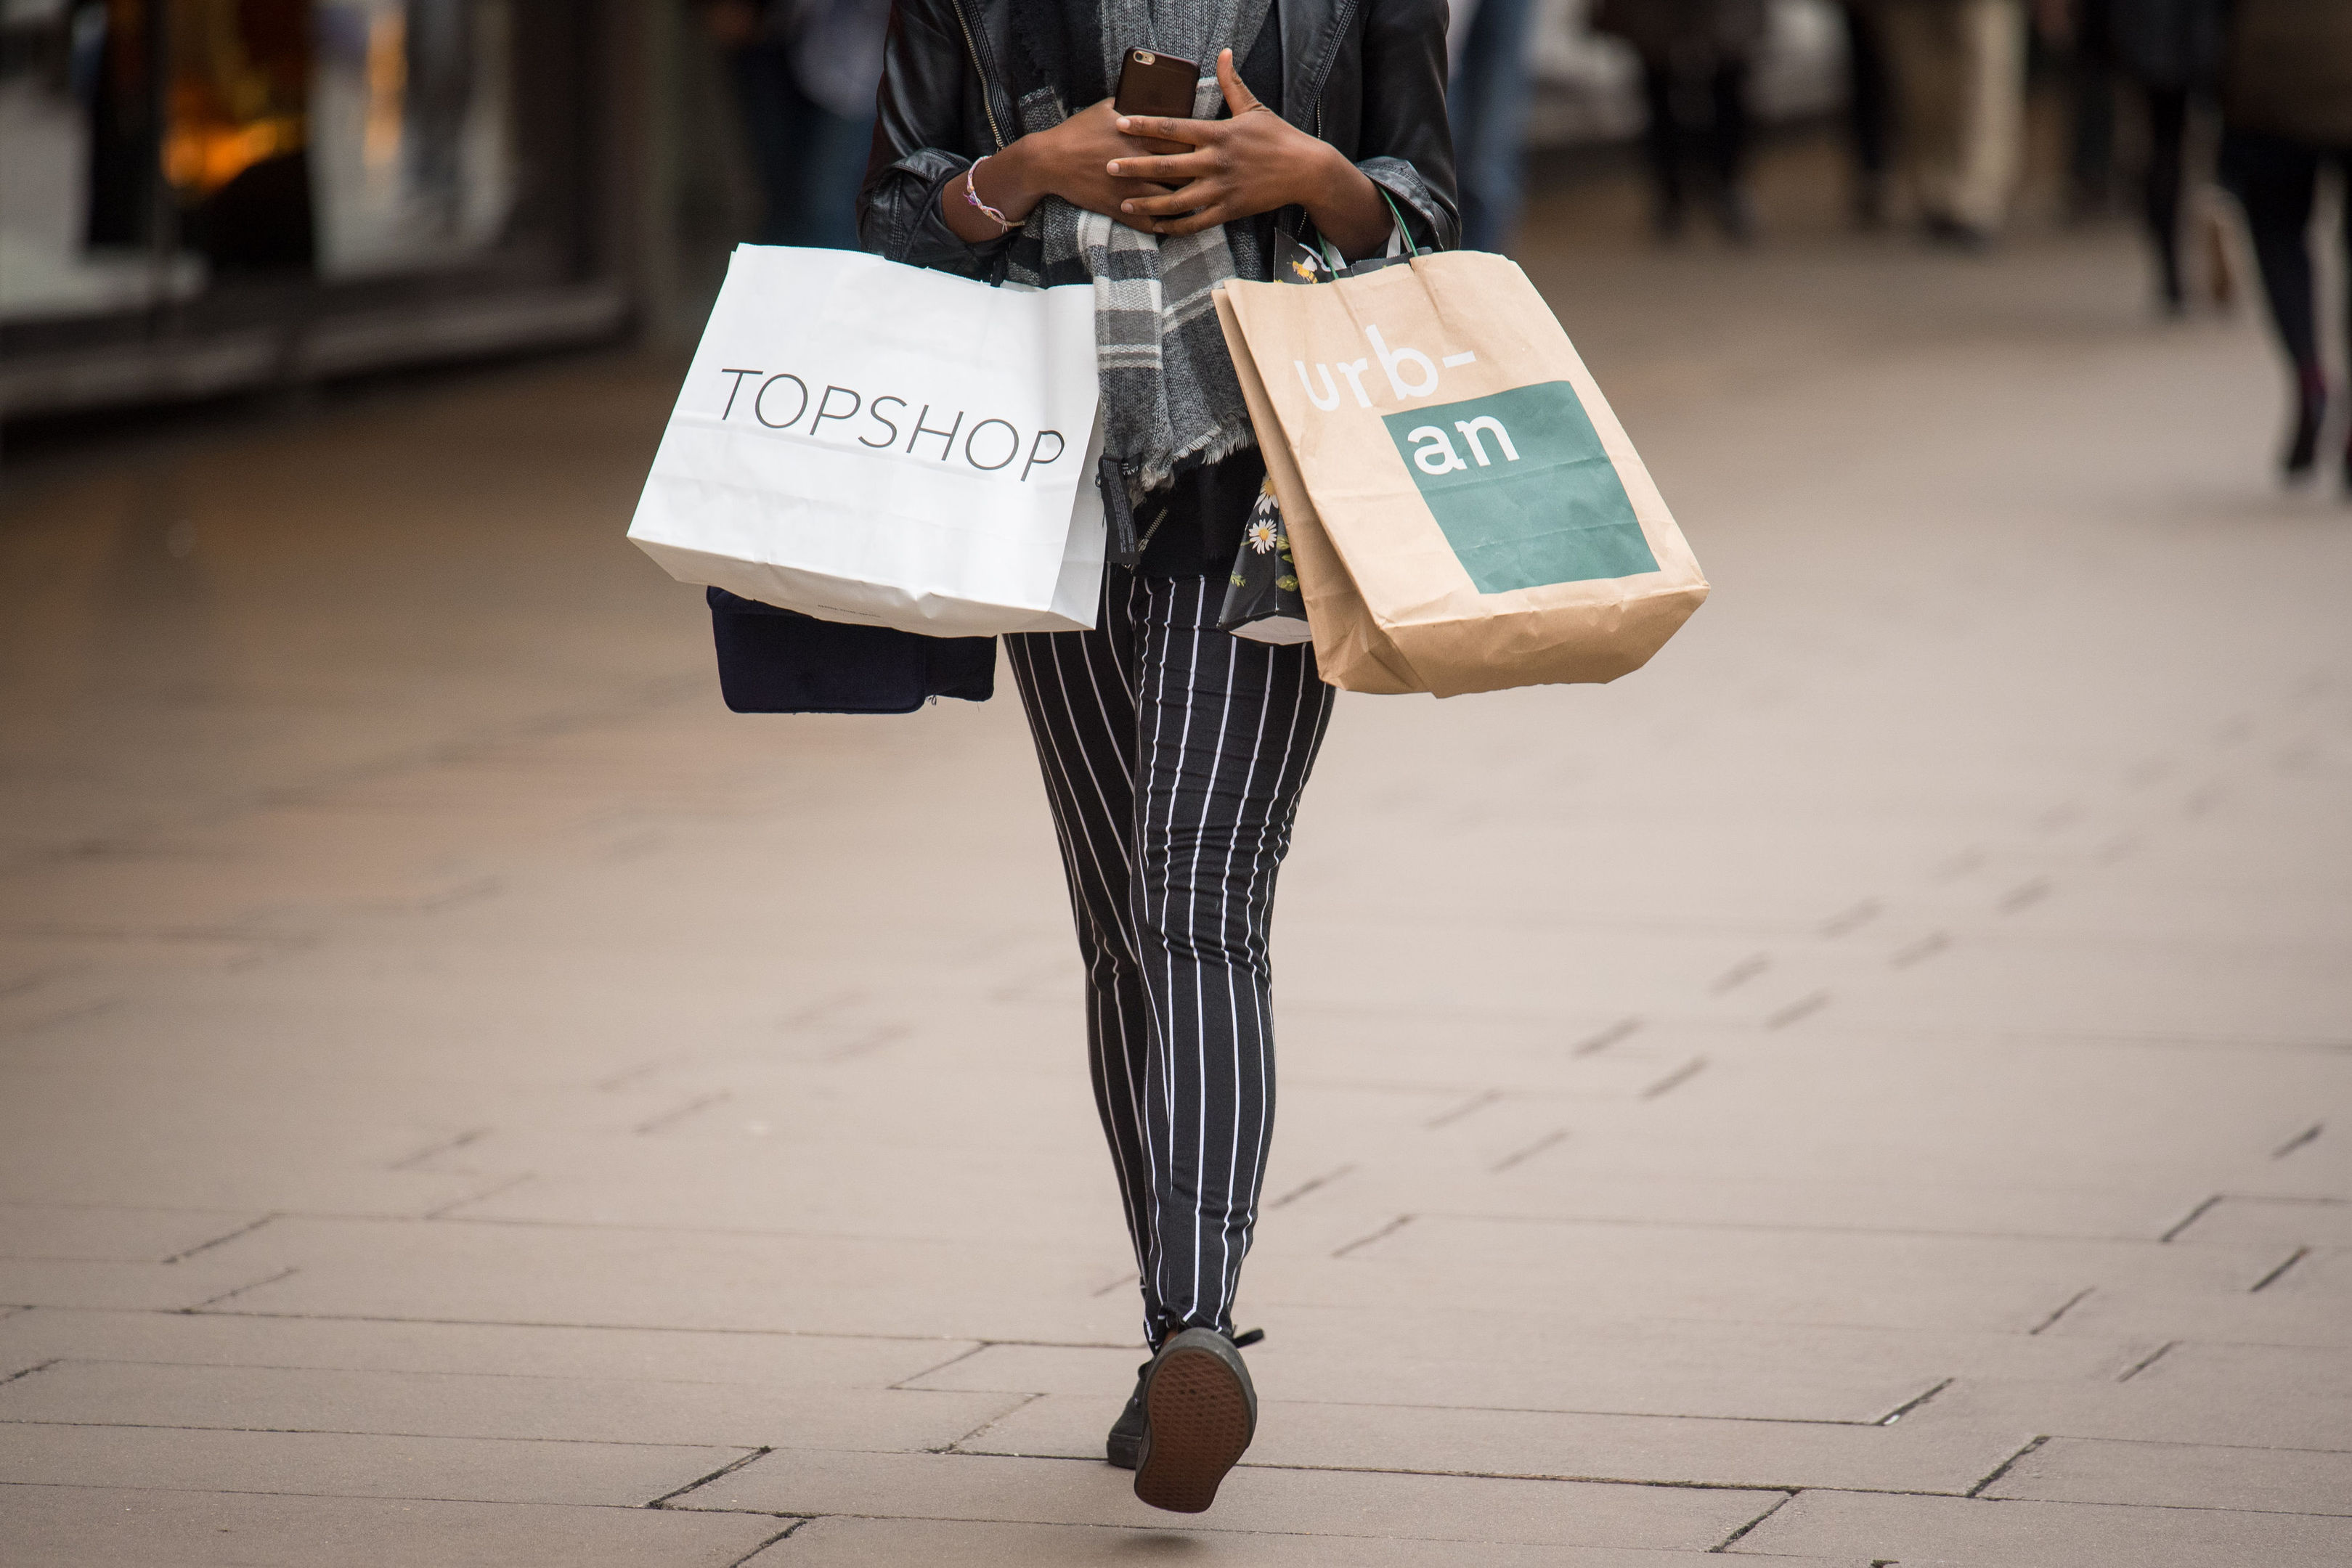 The UK high street has suffered its worst January sales period in four years as shoppers shunned the discounted racks to spend online, figures show (Dominic Lipinski/PA Wire)